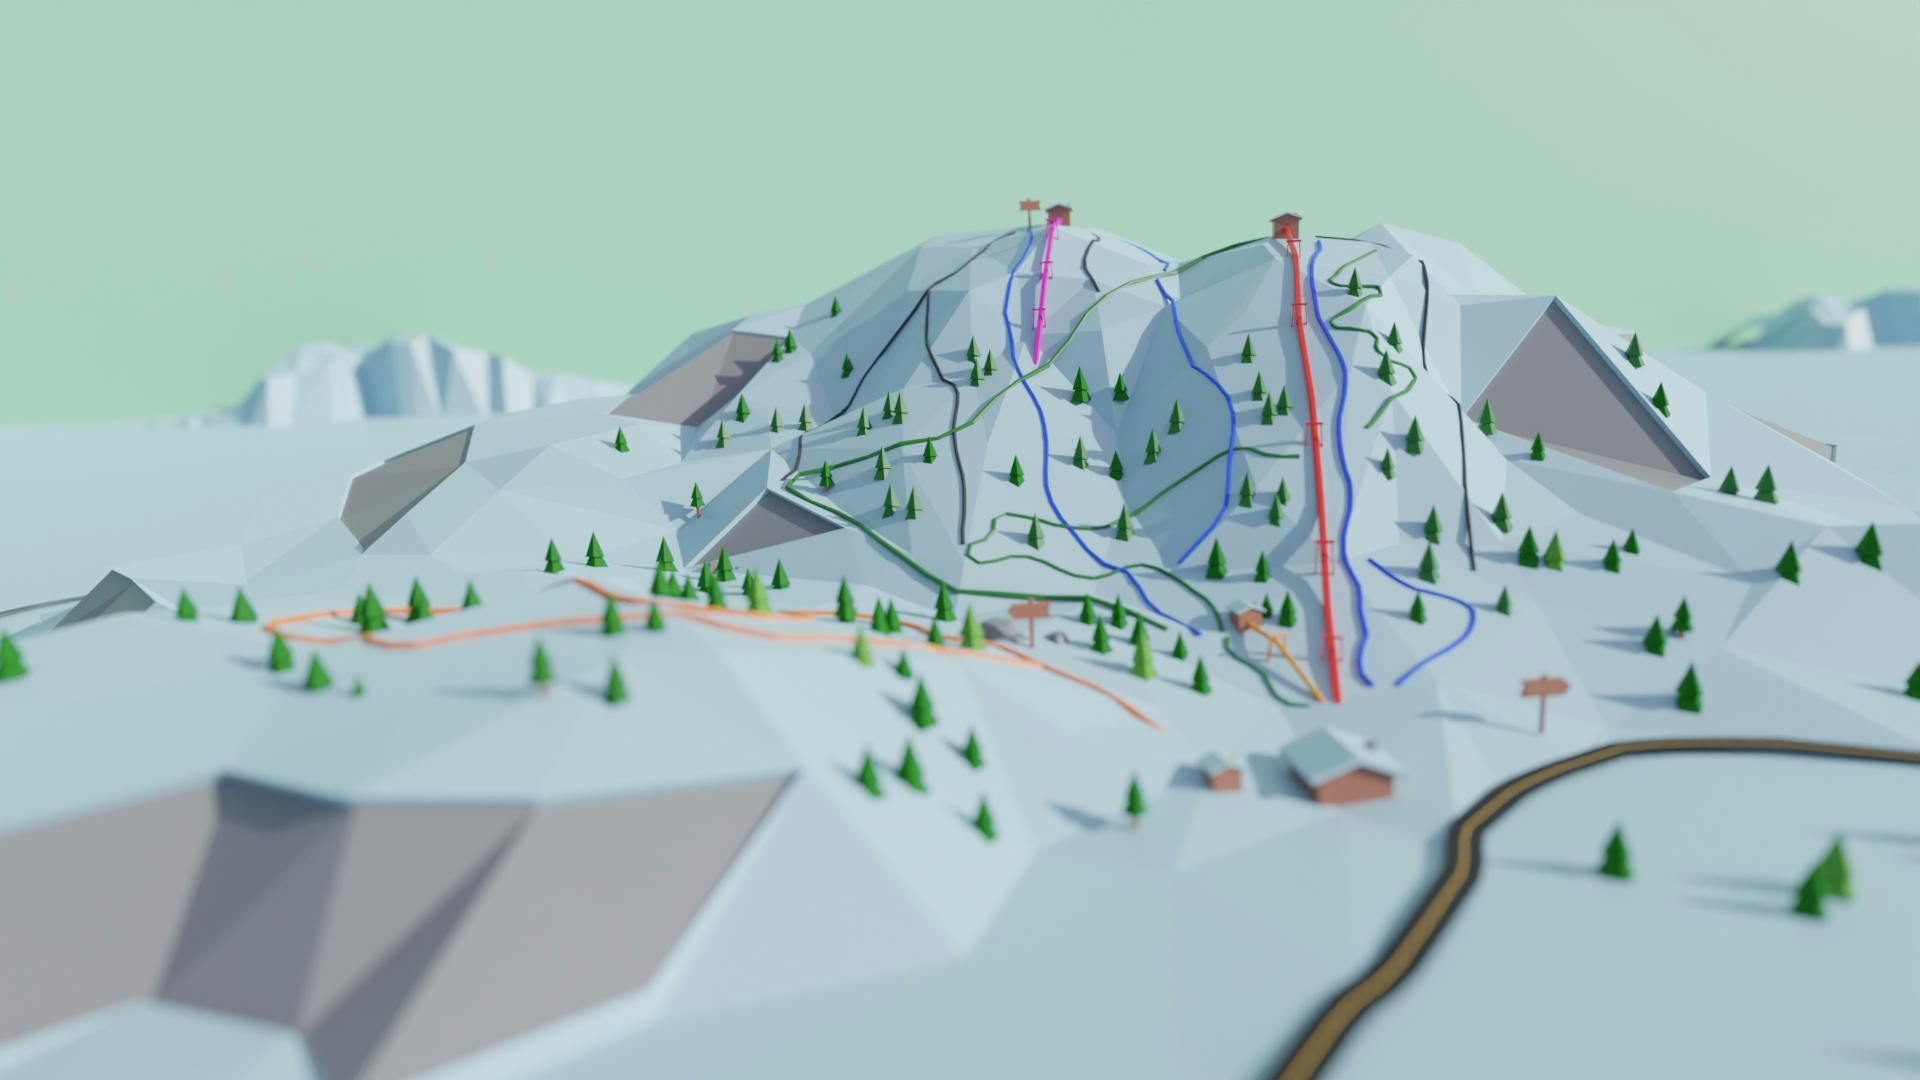 A 3d low poly render of Troll Mountain.